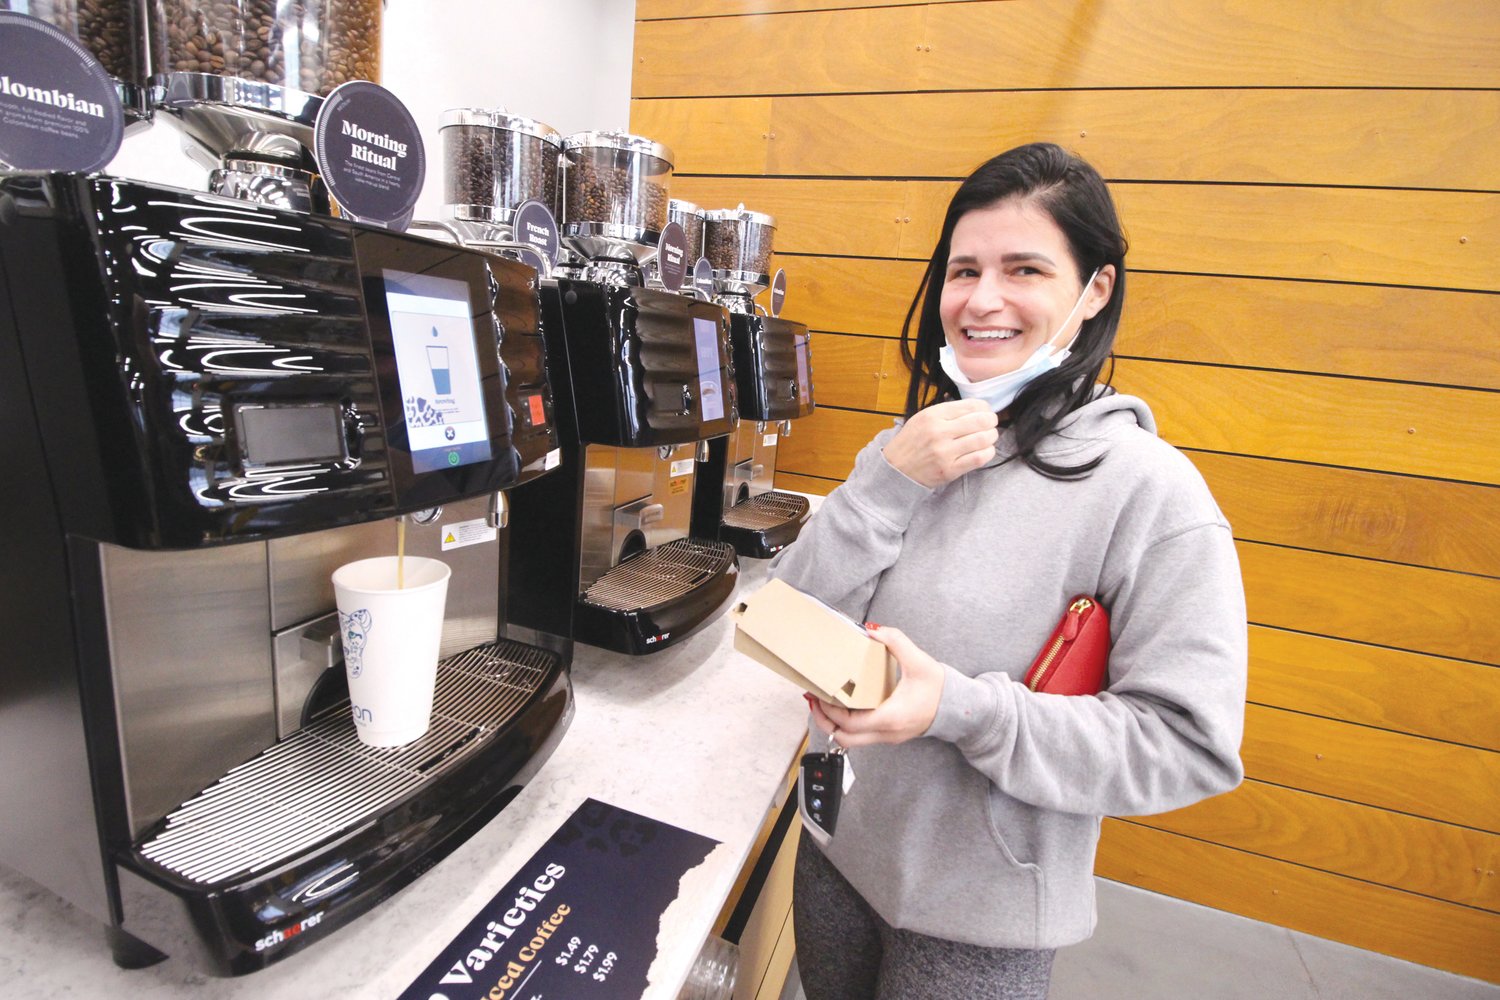 ONE OF THE FIRST: Desiree DelGrosso was one of the first, if not the first customer at the Neon Marketplace that
opened yesterday morning at the intersection of Airport and Post Roads.